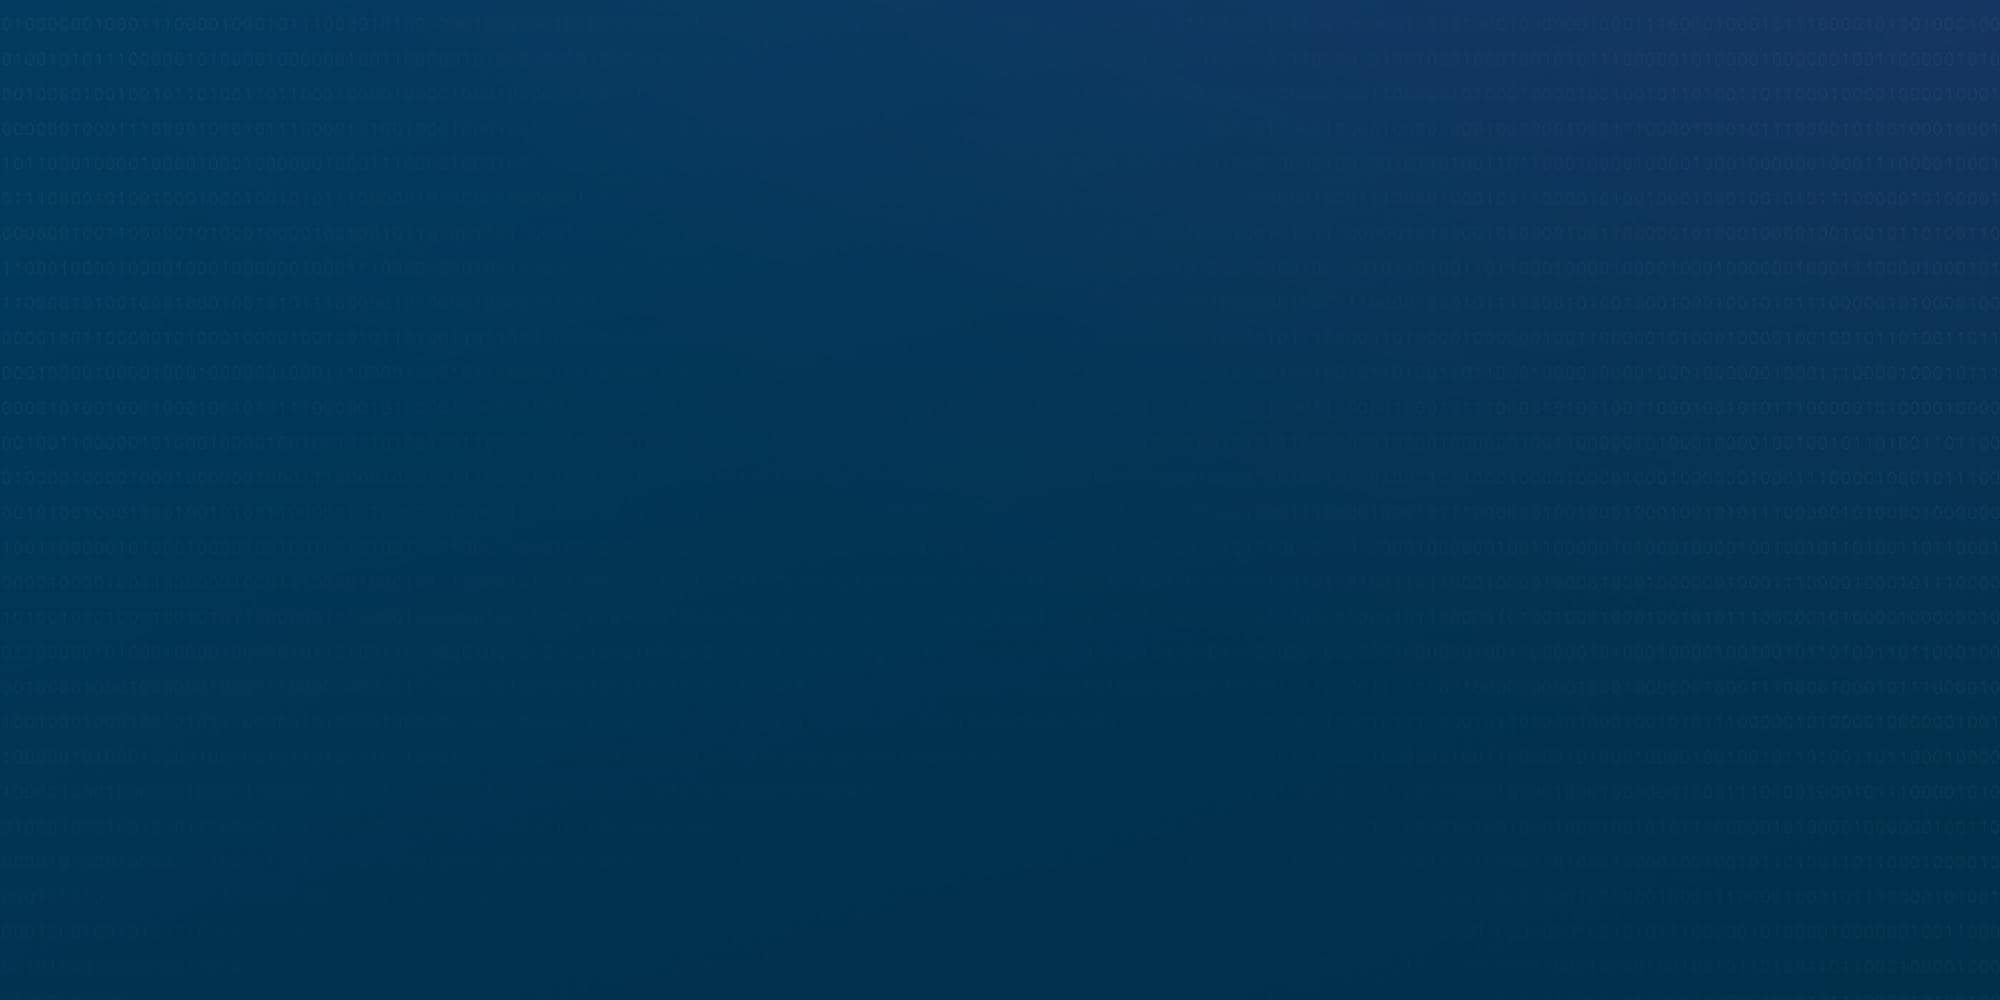 Veyr dark blue gradient with transparent numbers overlay